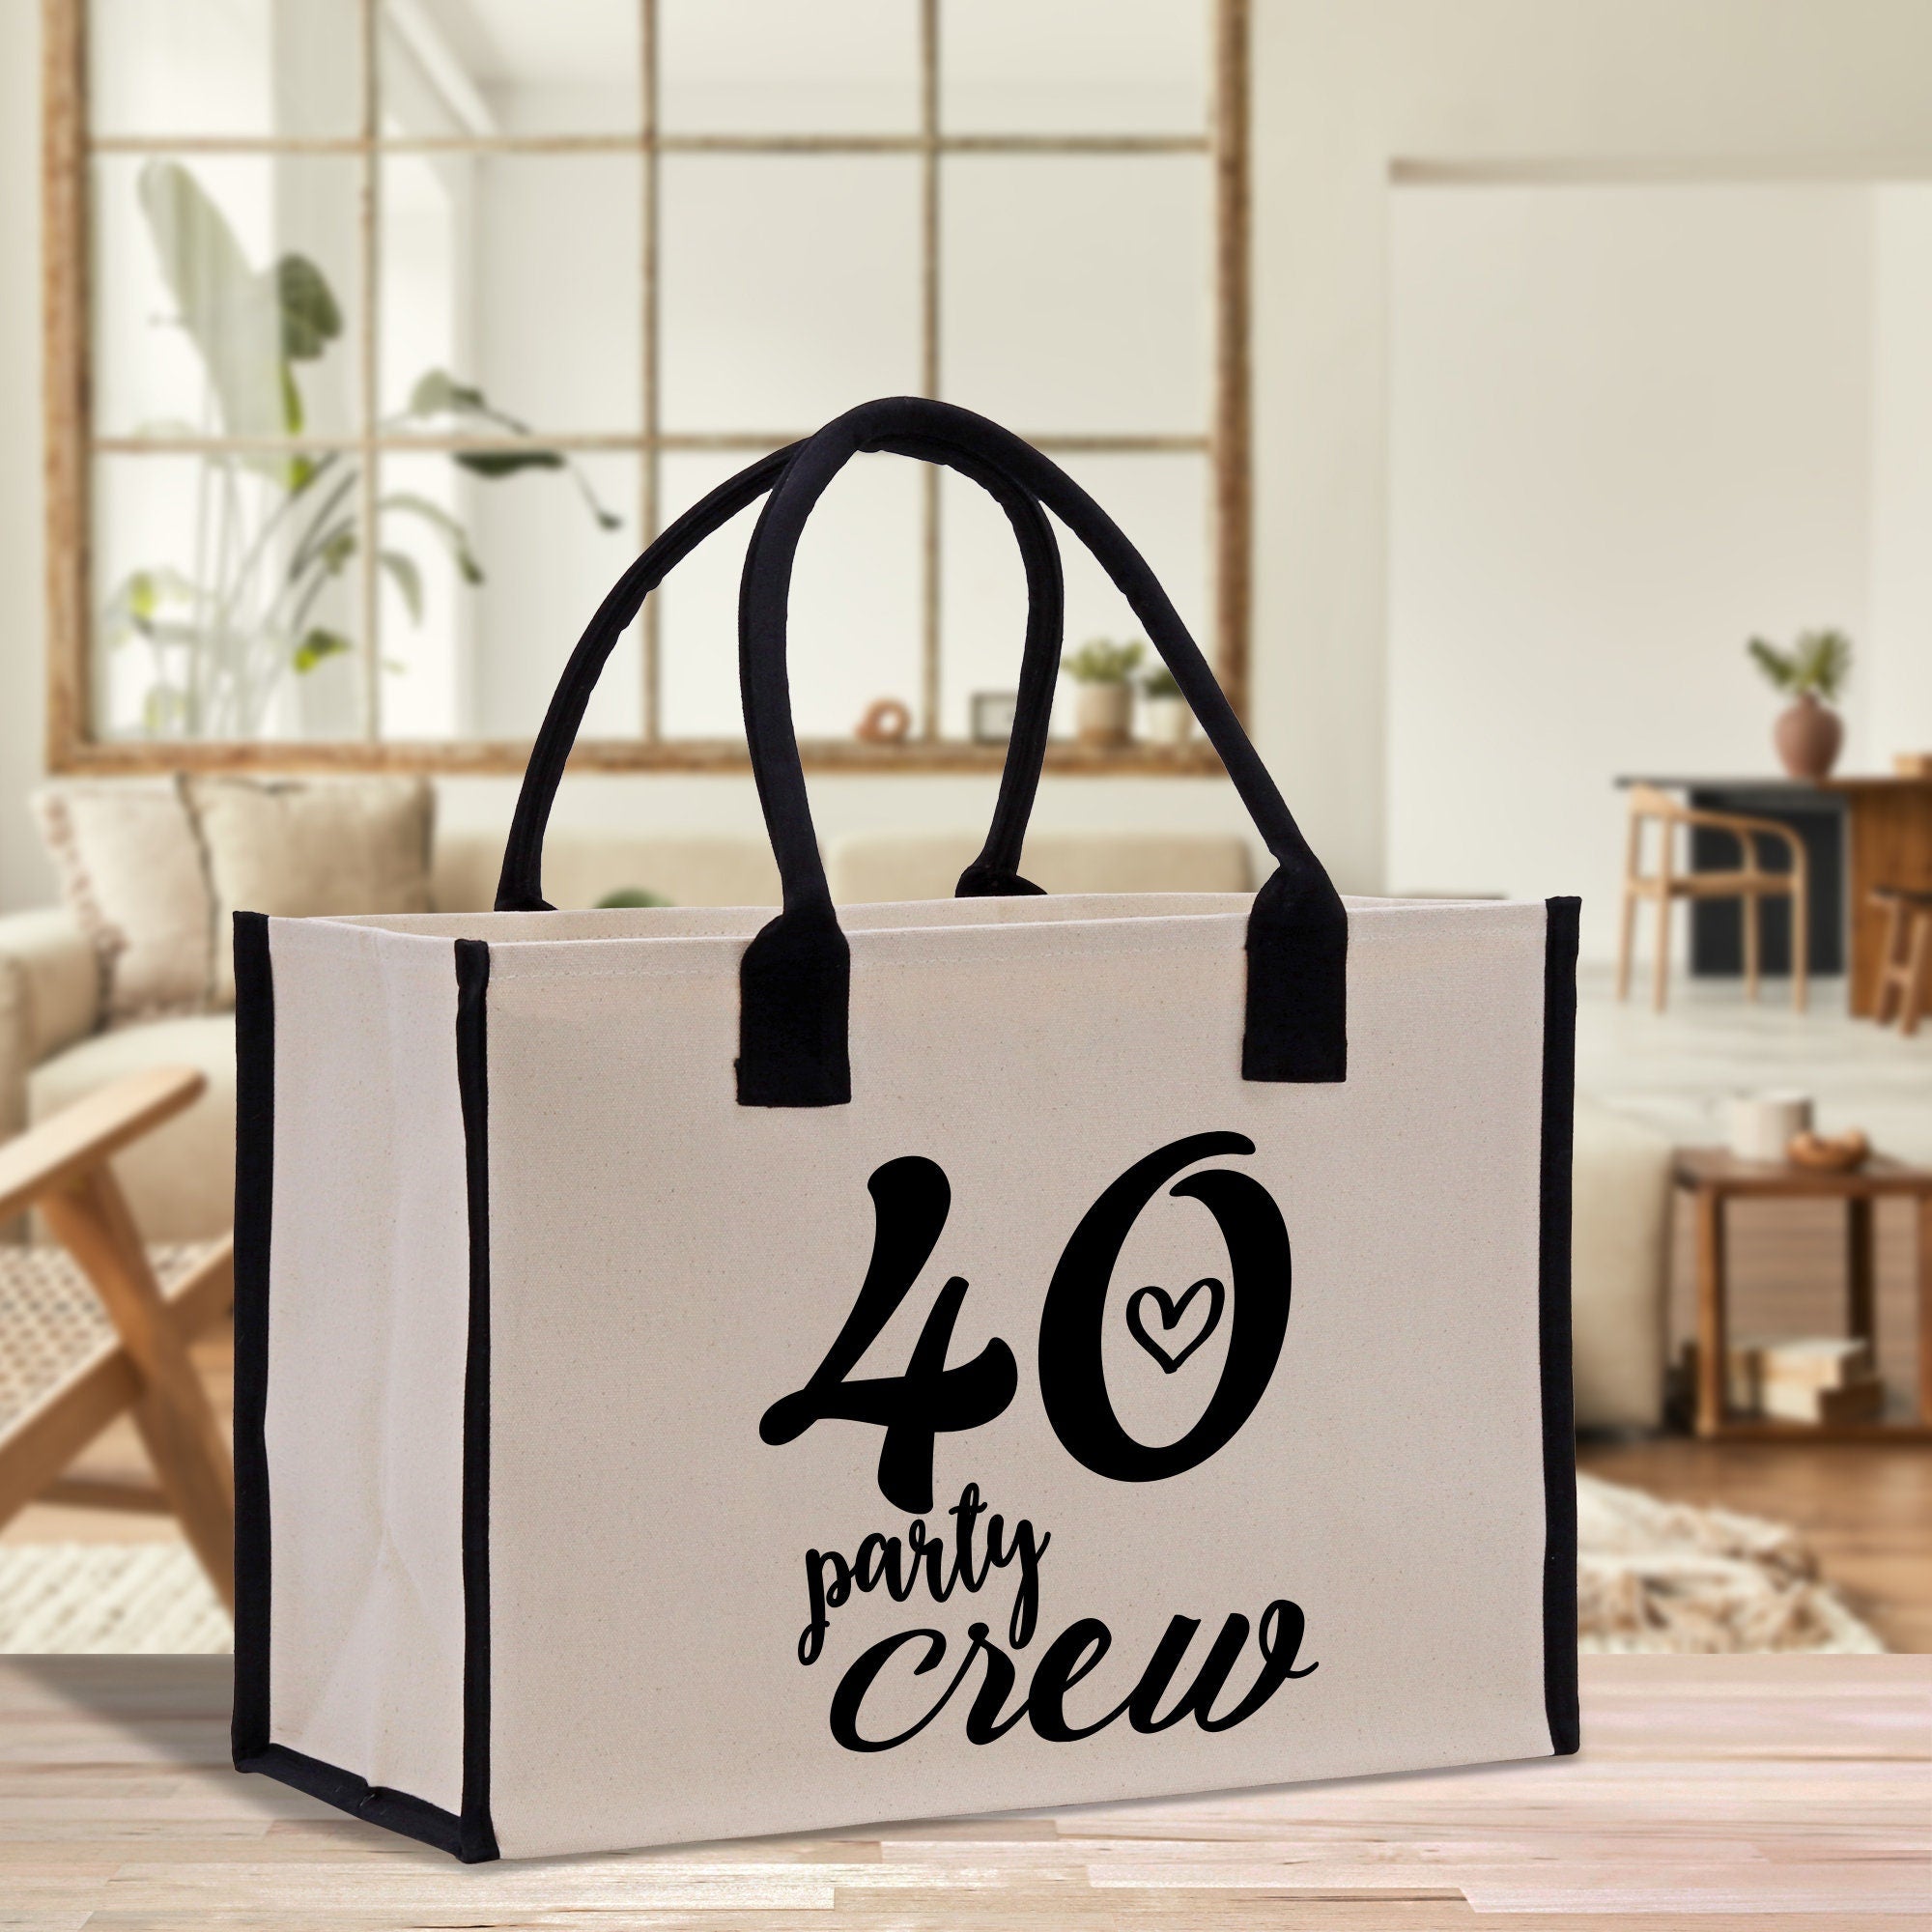 60 Fifty and Fabulous 40th Party Crew Age Birthday Cotton Canvas Tote Bag 40th Birthday Gift For Women 60th Birthday Celebration Party Gift